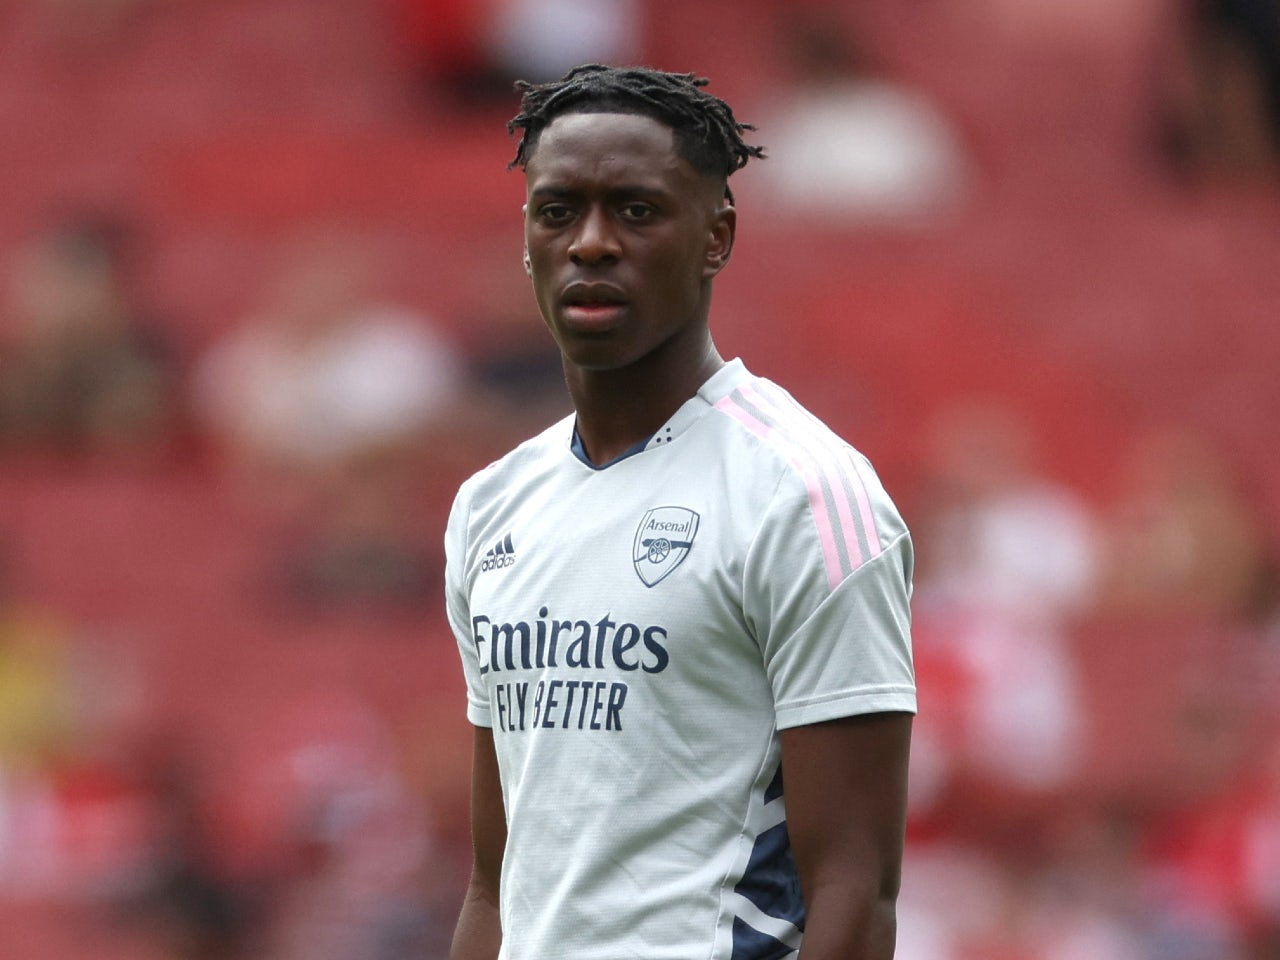 Arsenal transfer news: Gunners confirm midfielder's loan exit with option to buy